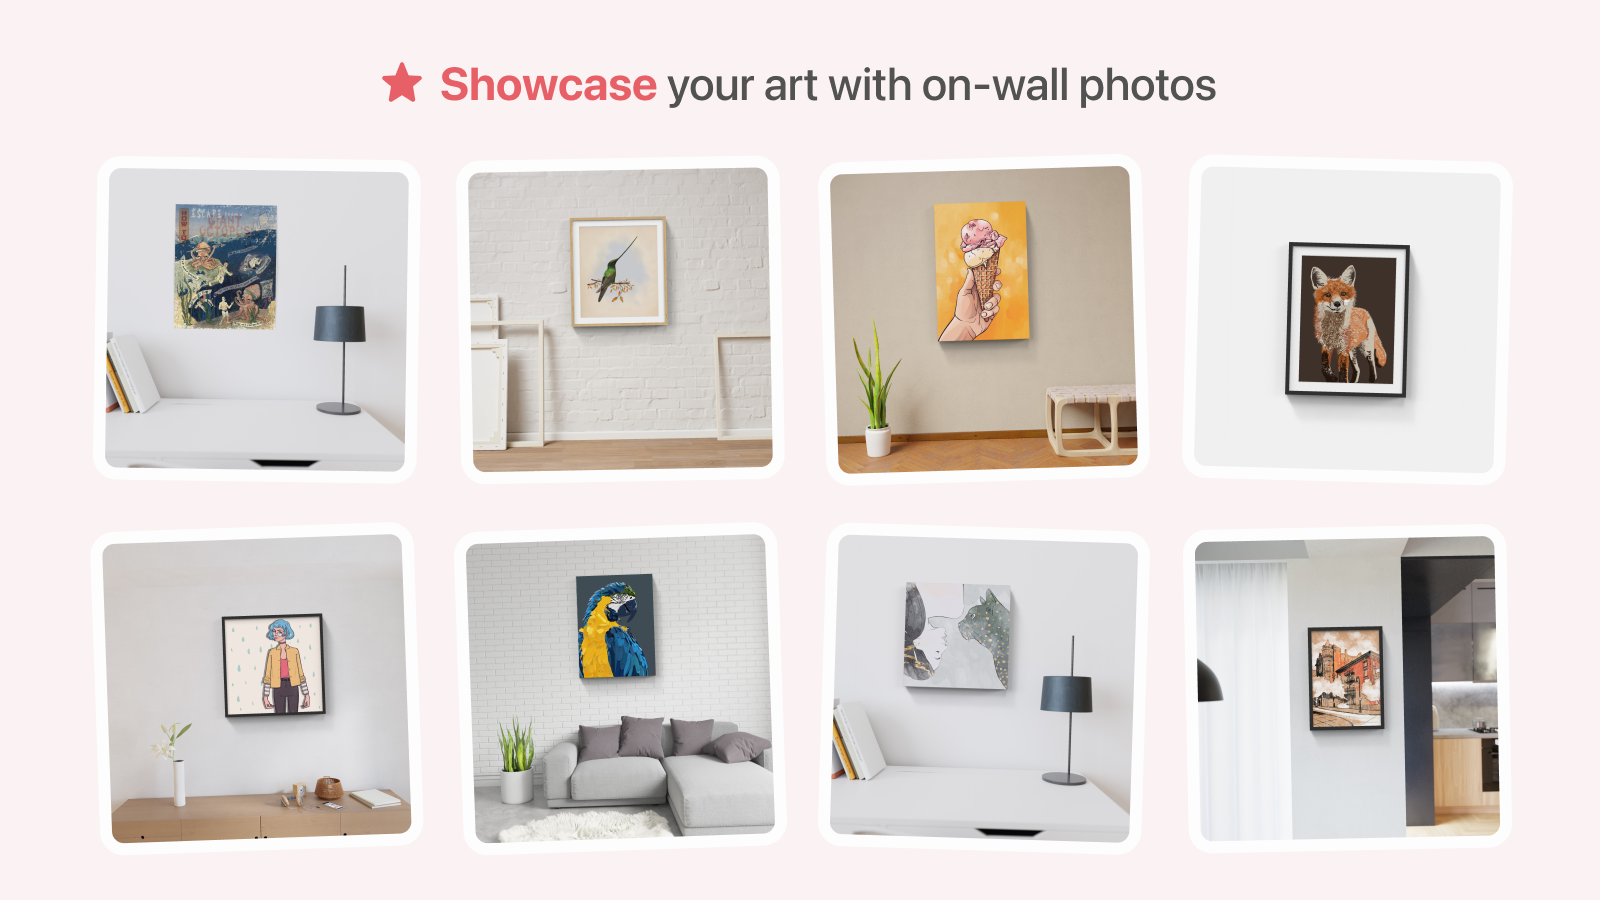 Showcase your art with on-wall photos